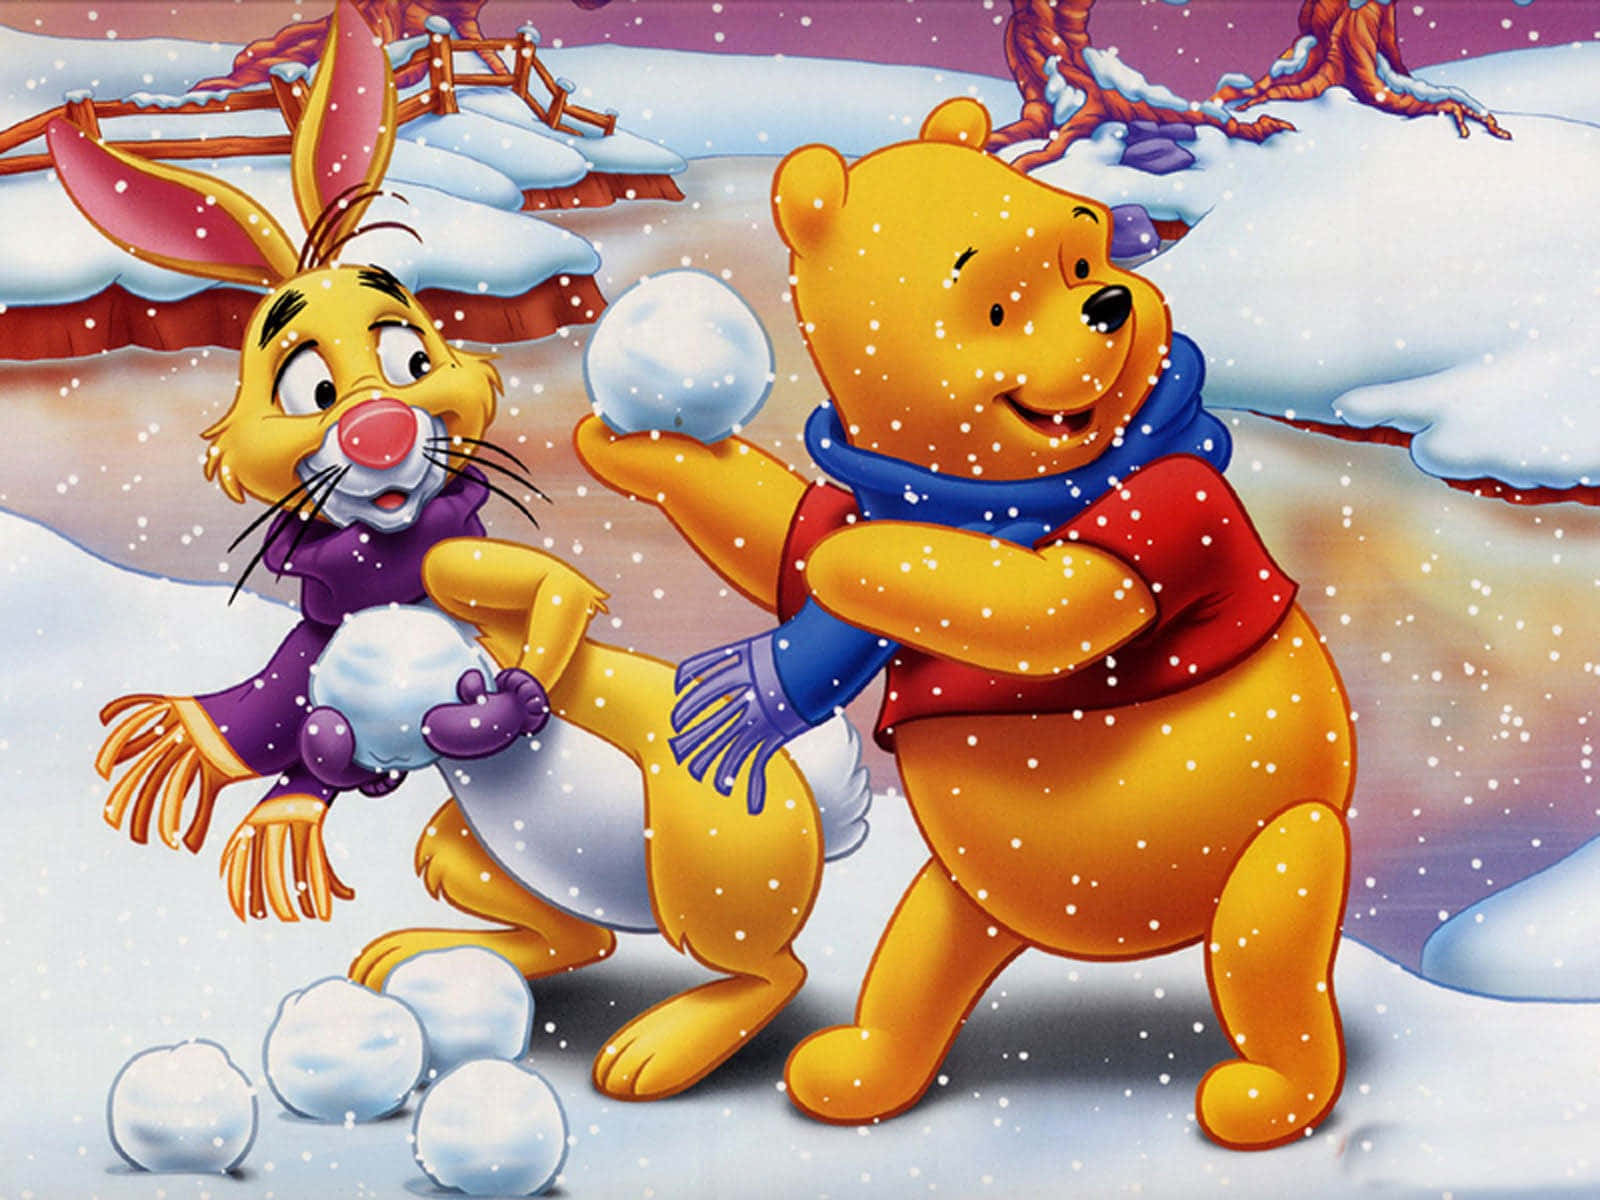 “Cuddle with the One and Only, Winnie the Pooh” Wallpaper